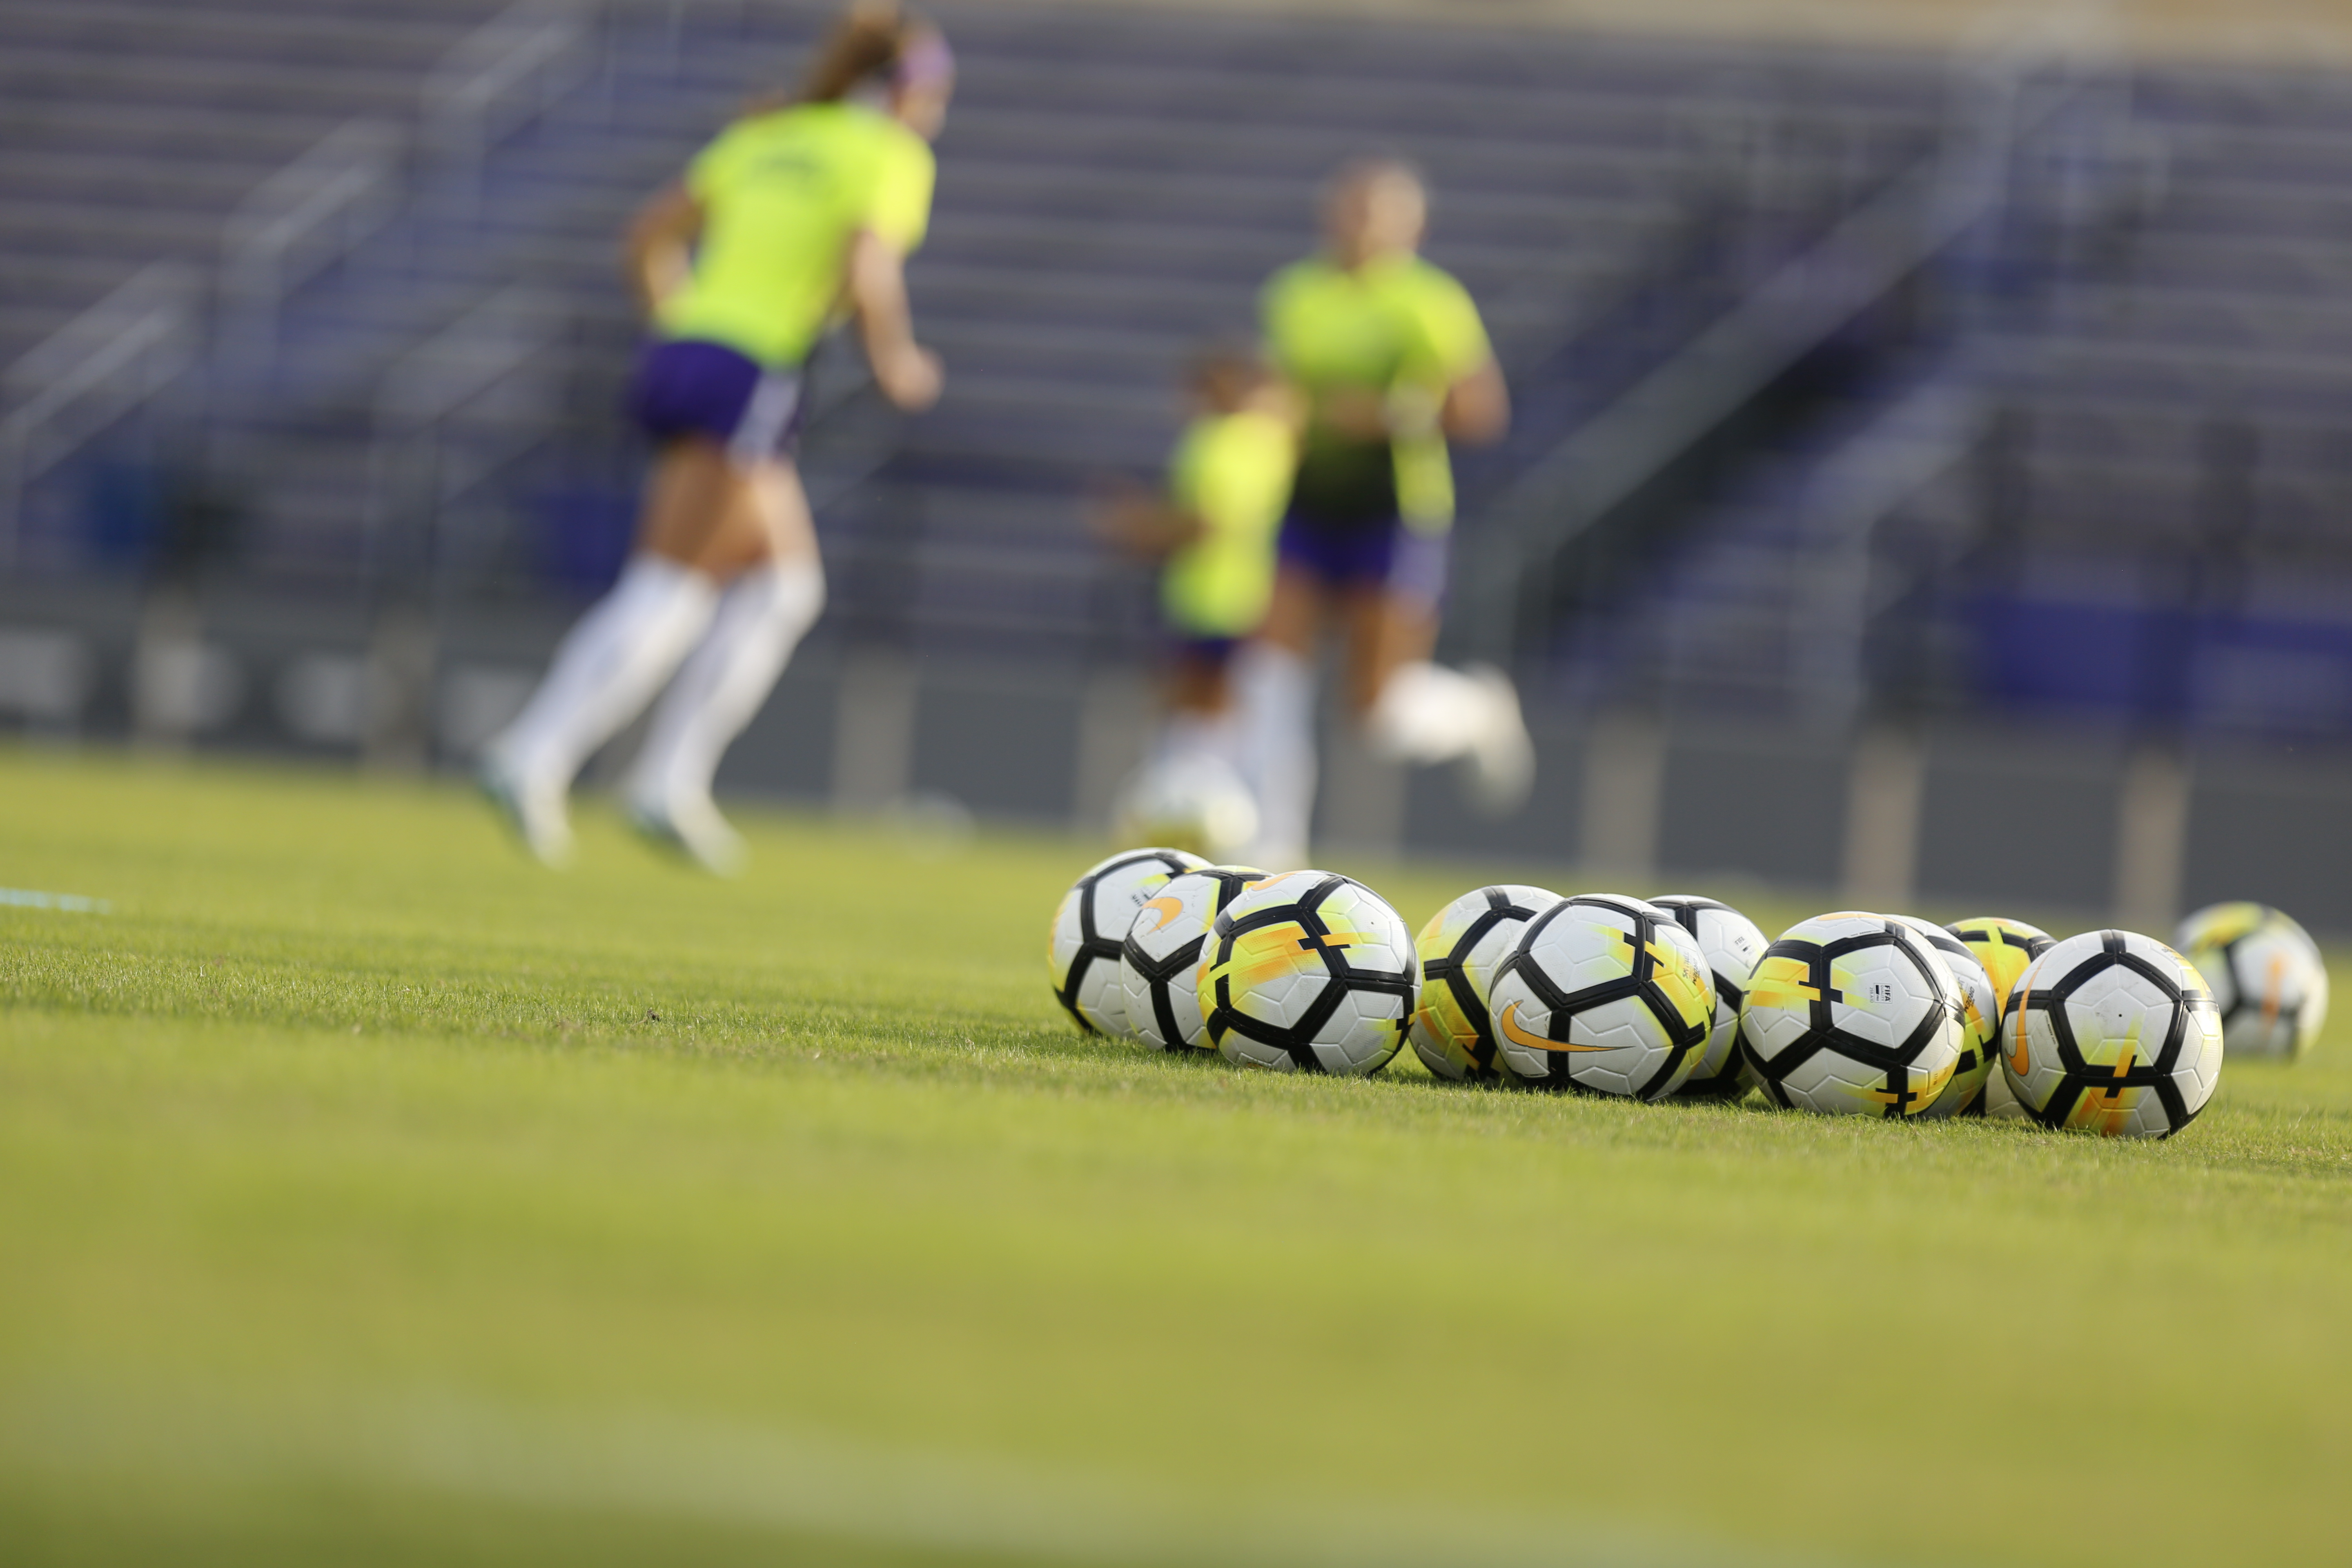 JMU Women's Soccer Welcome Back ID Clinic event image